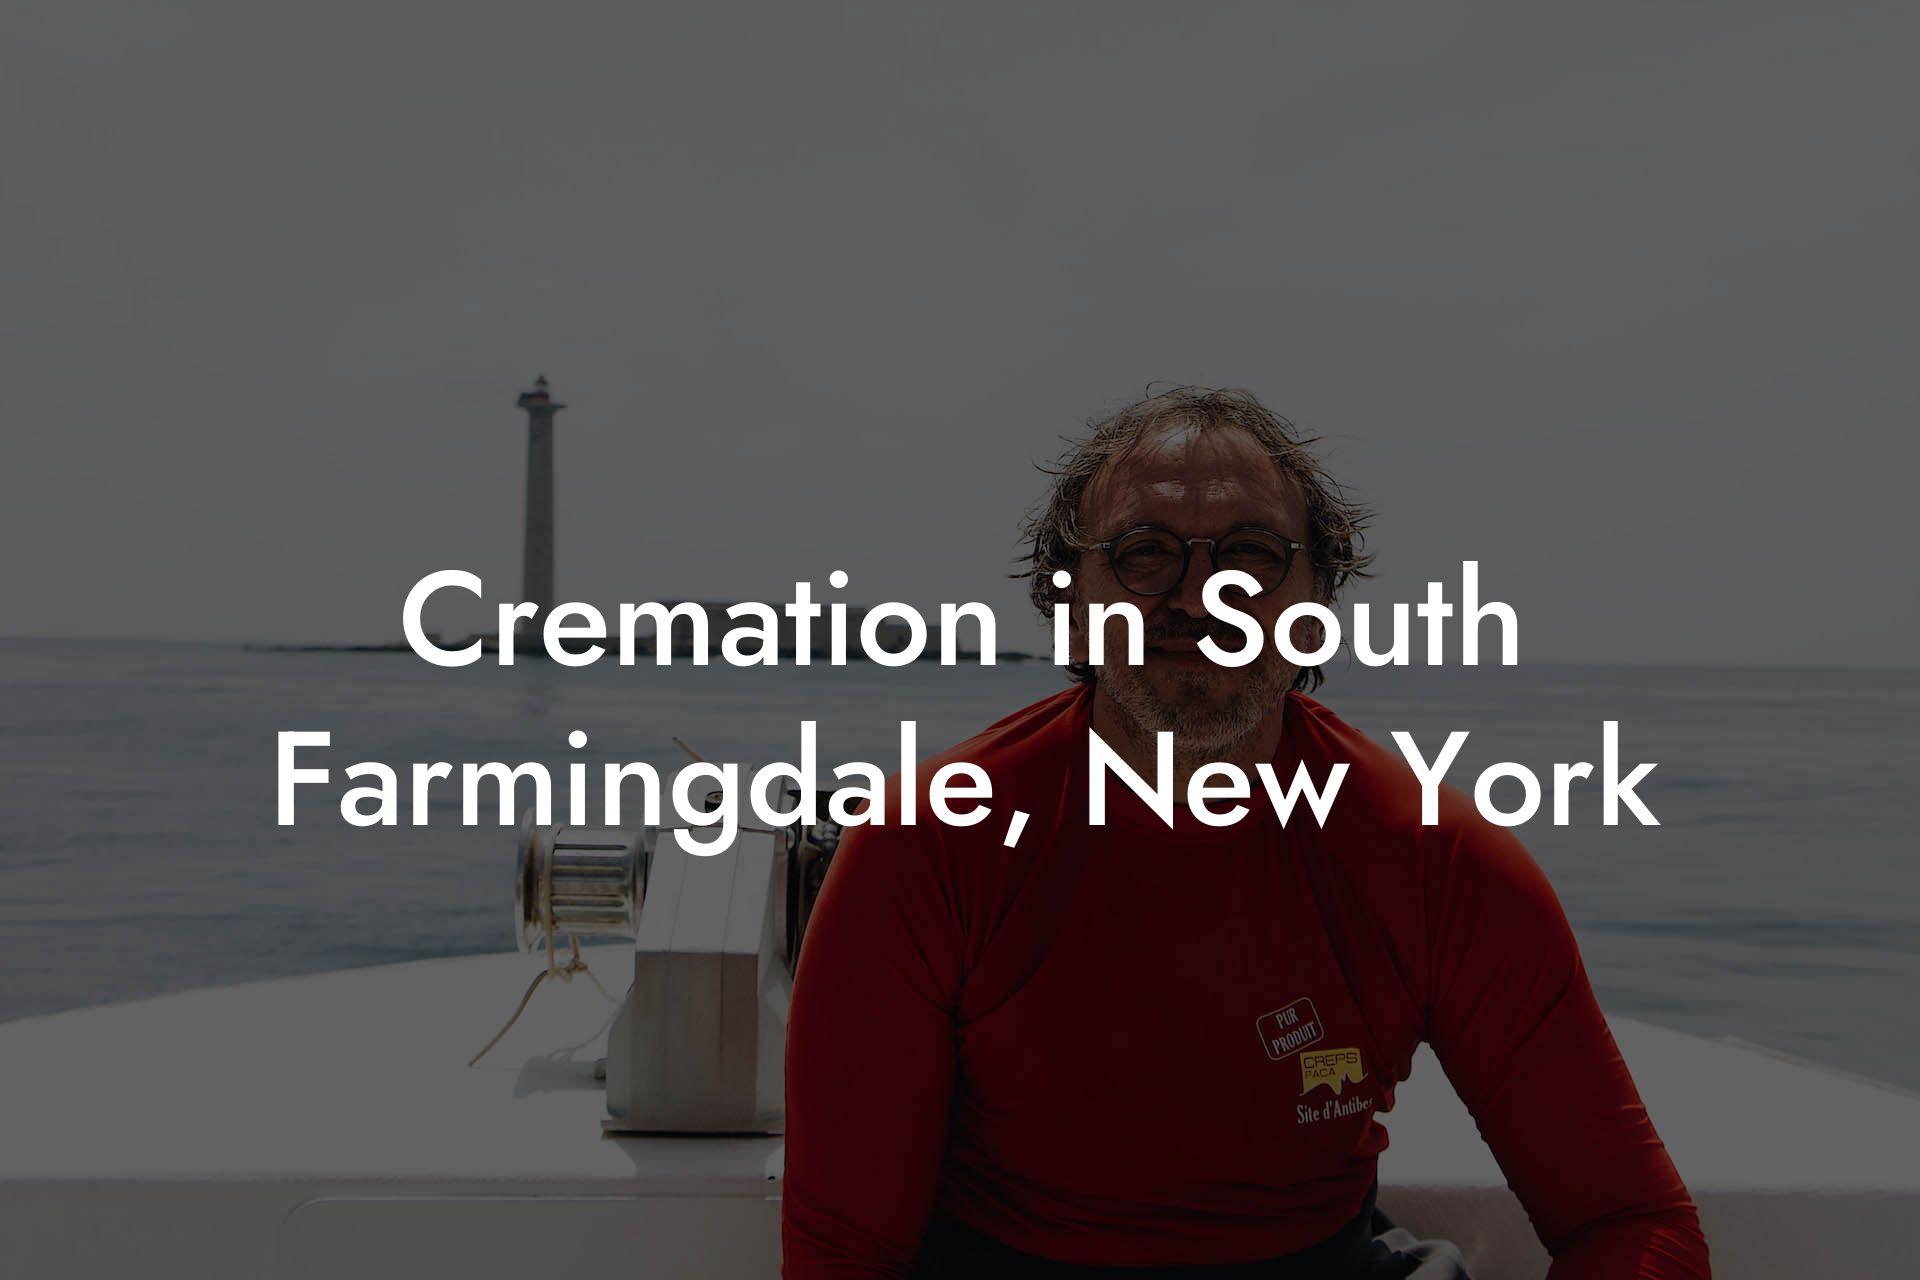 Cremation in South Farmingdale, New York